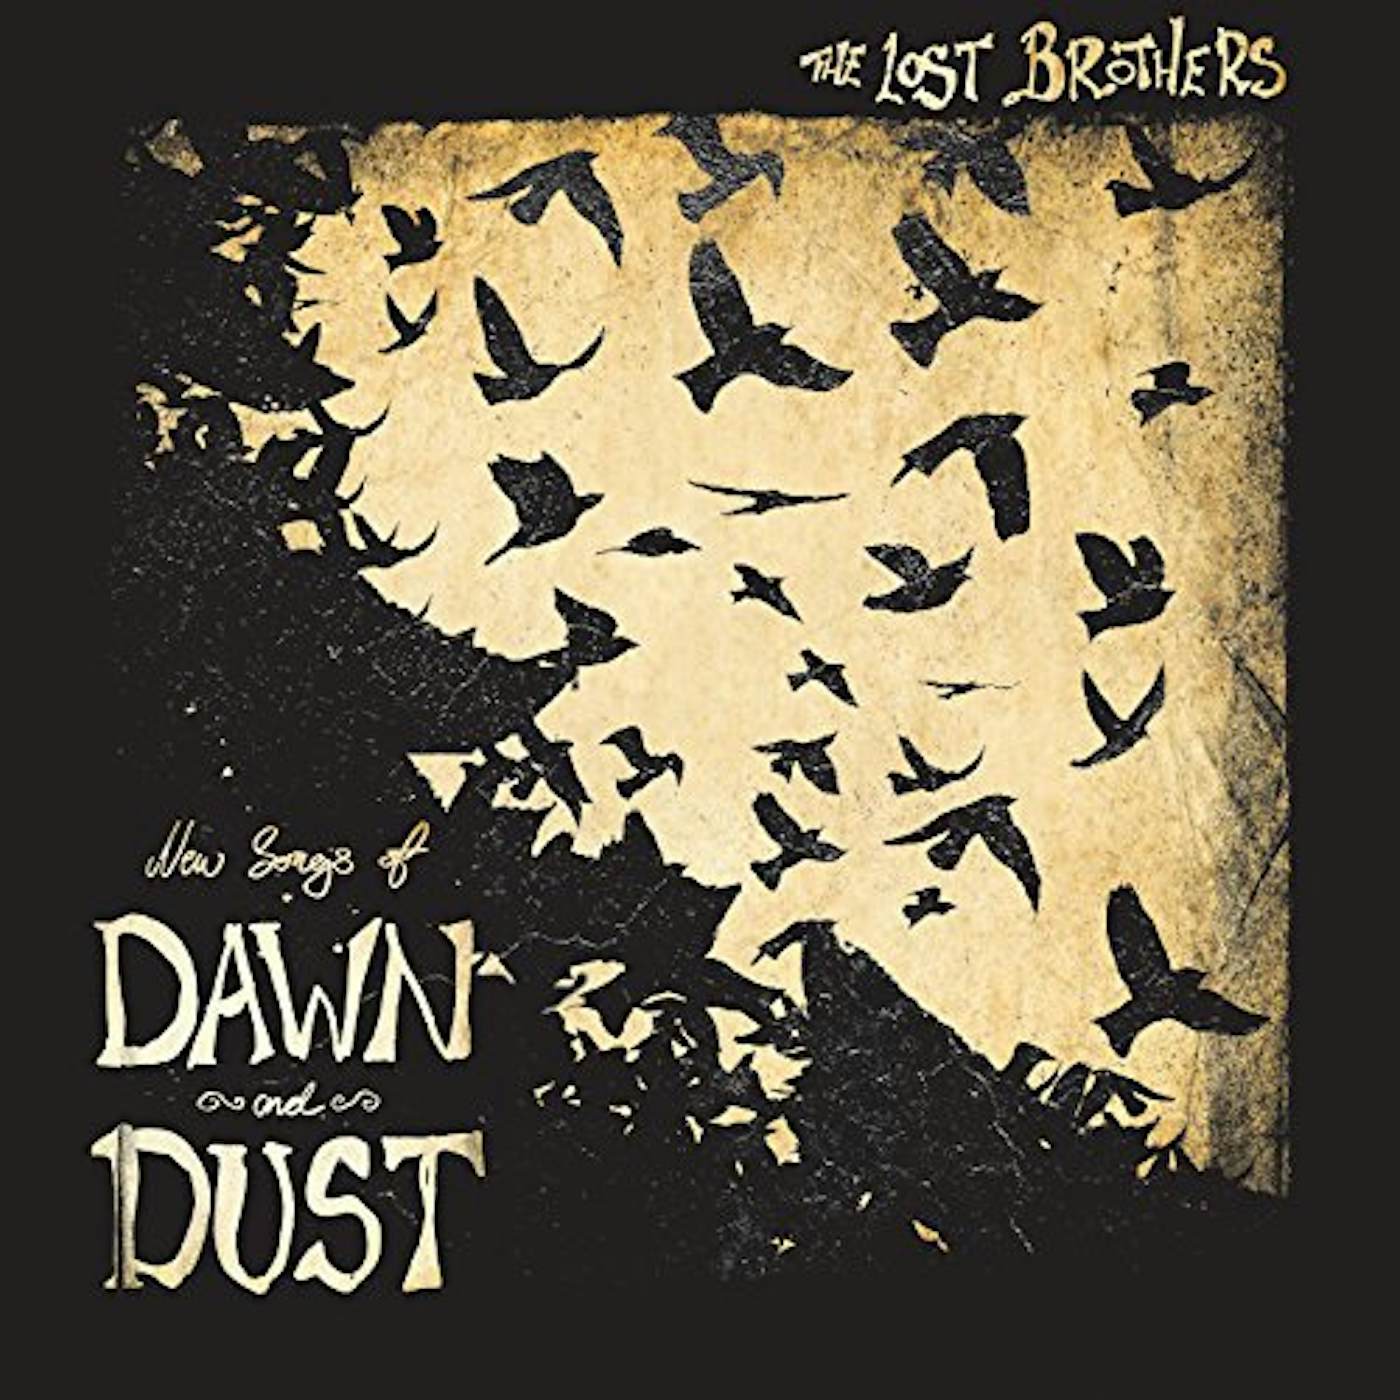 The Lost Brothers New Songs of Dawn and Dust Vinyl Record